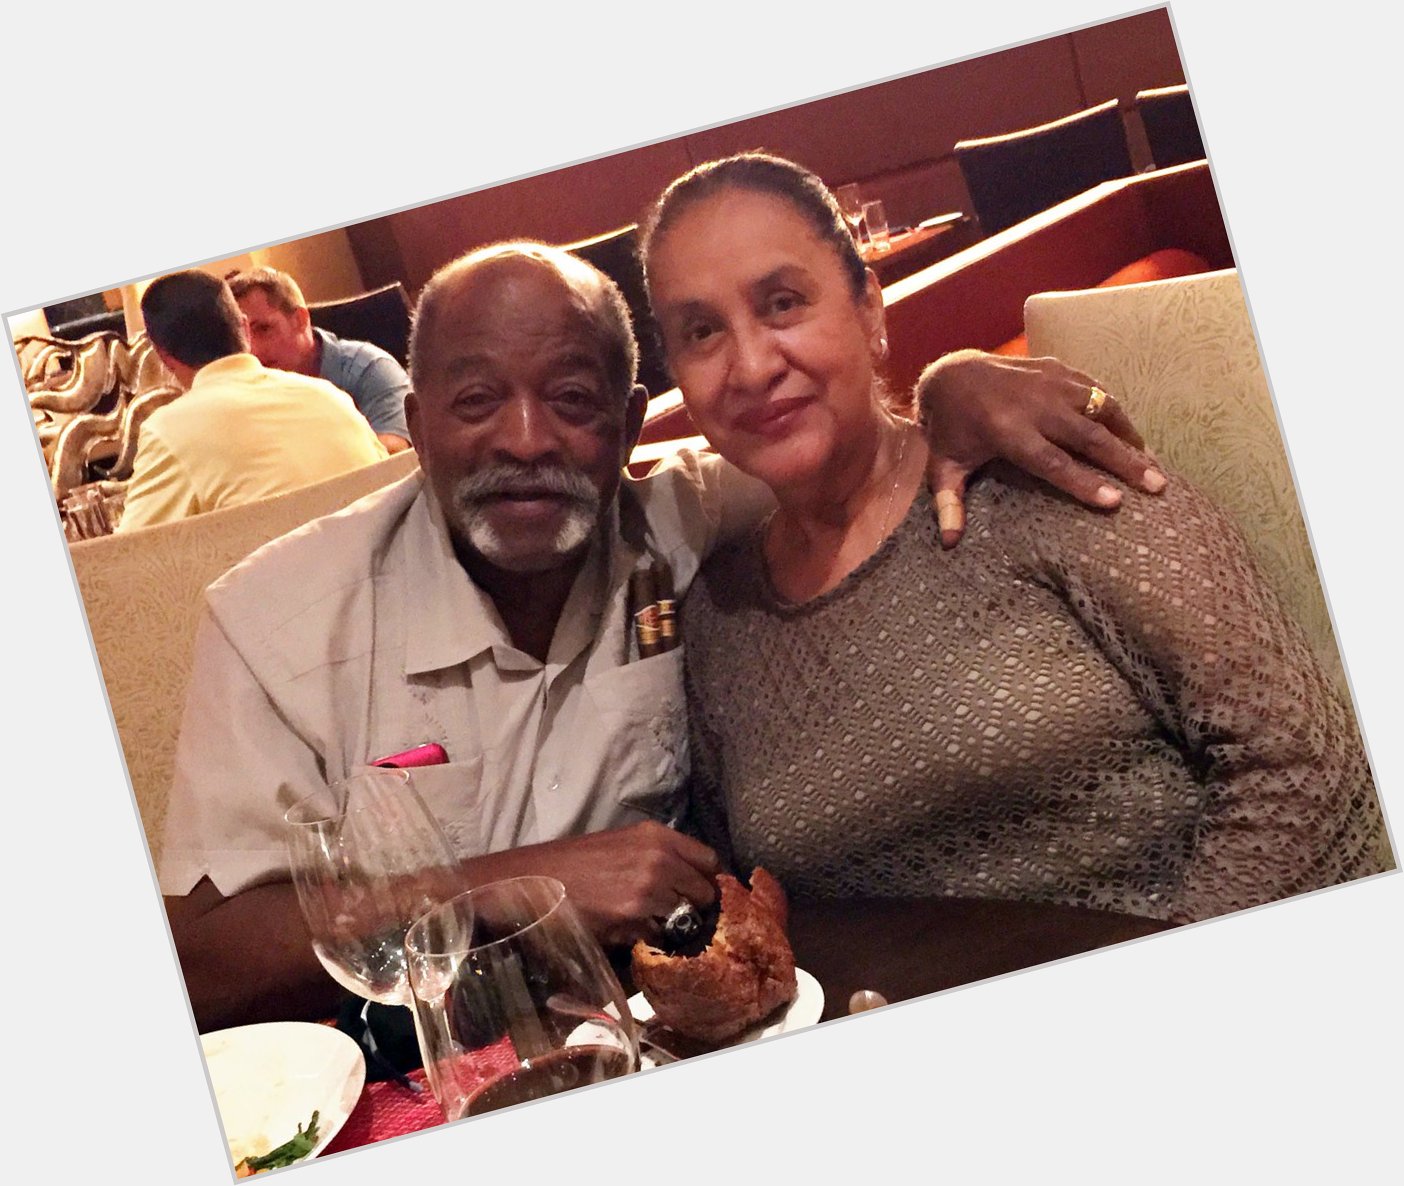  wishes our very good friend & legend Luis Tiant a Happy 75th Birthday today! 